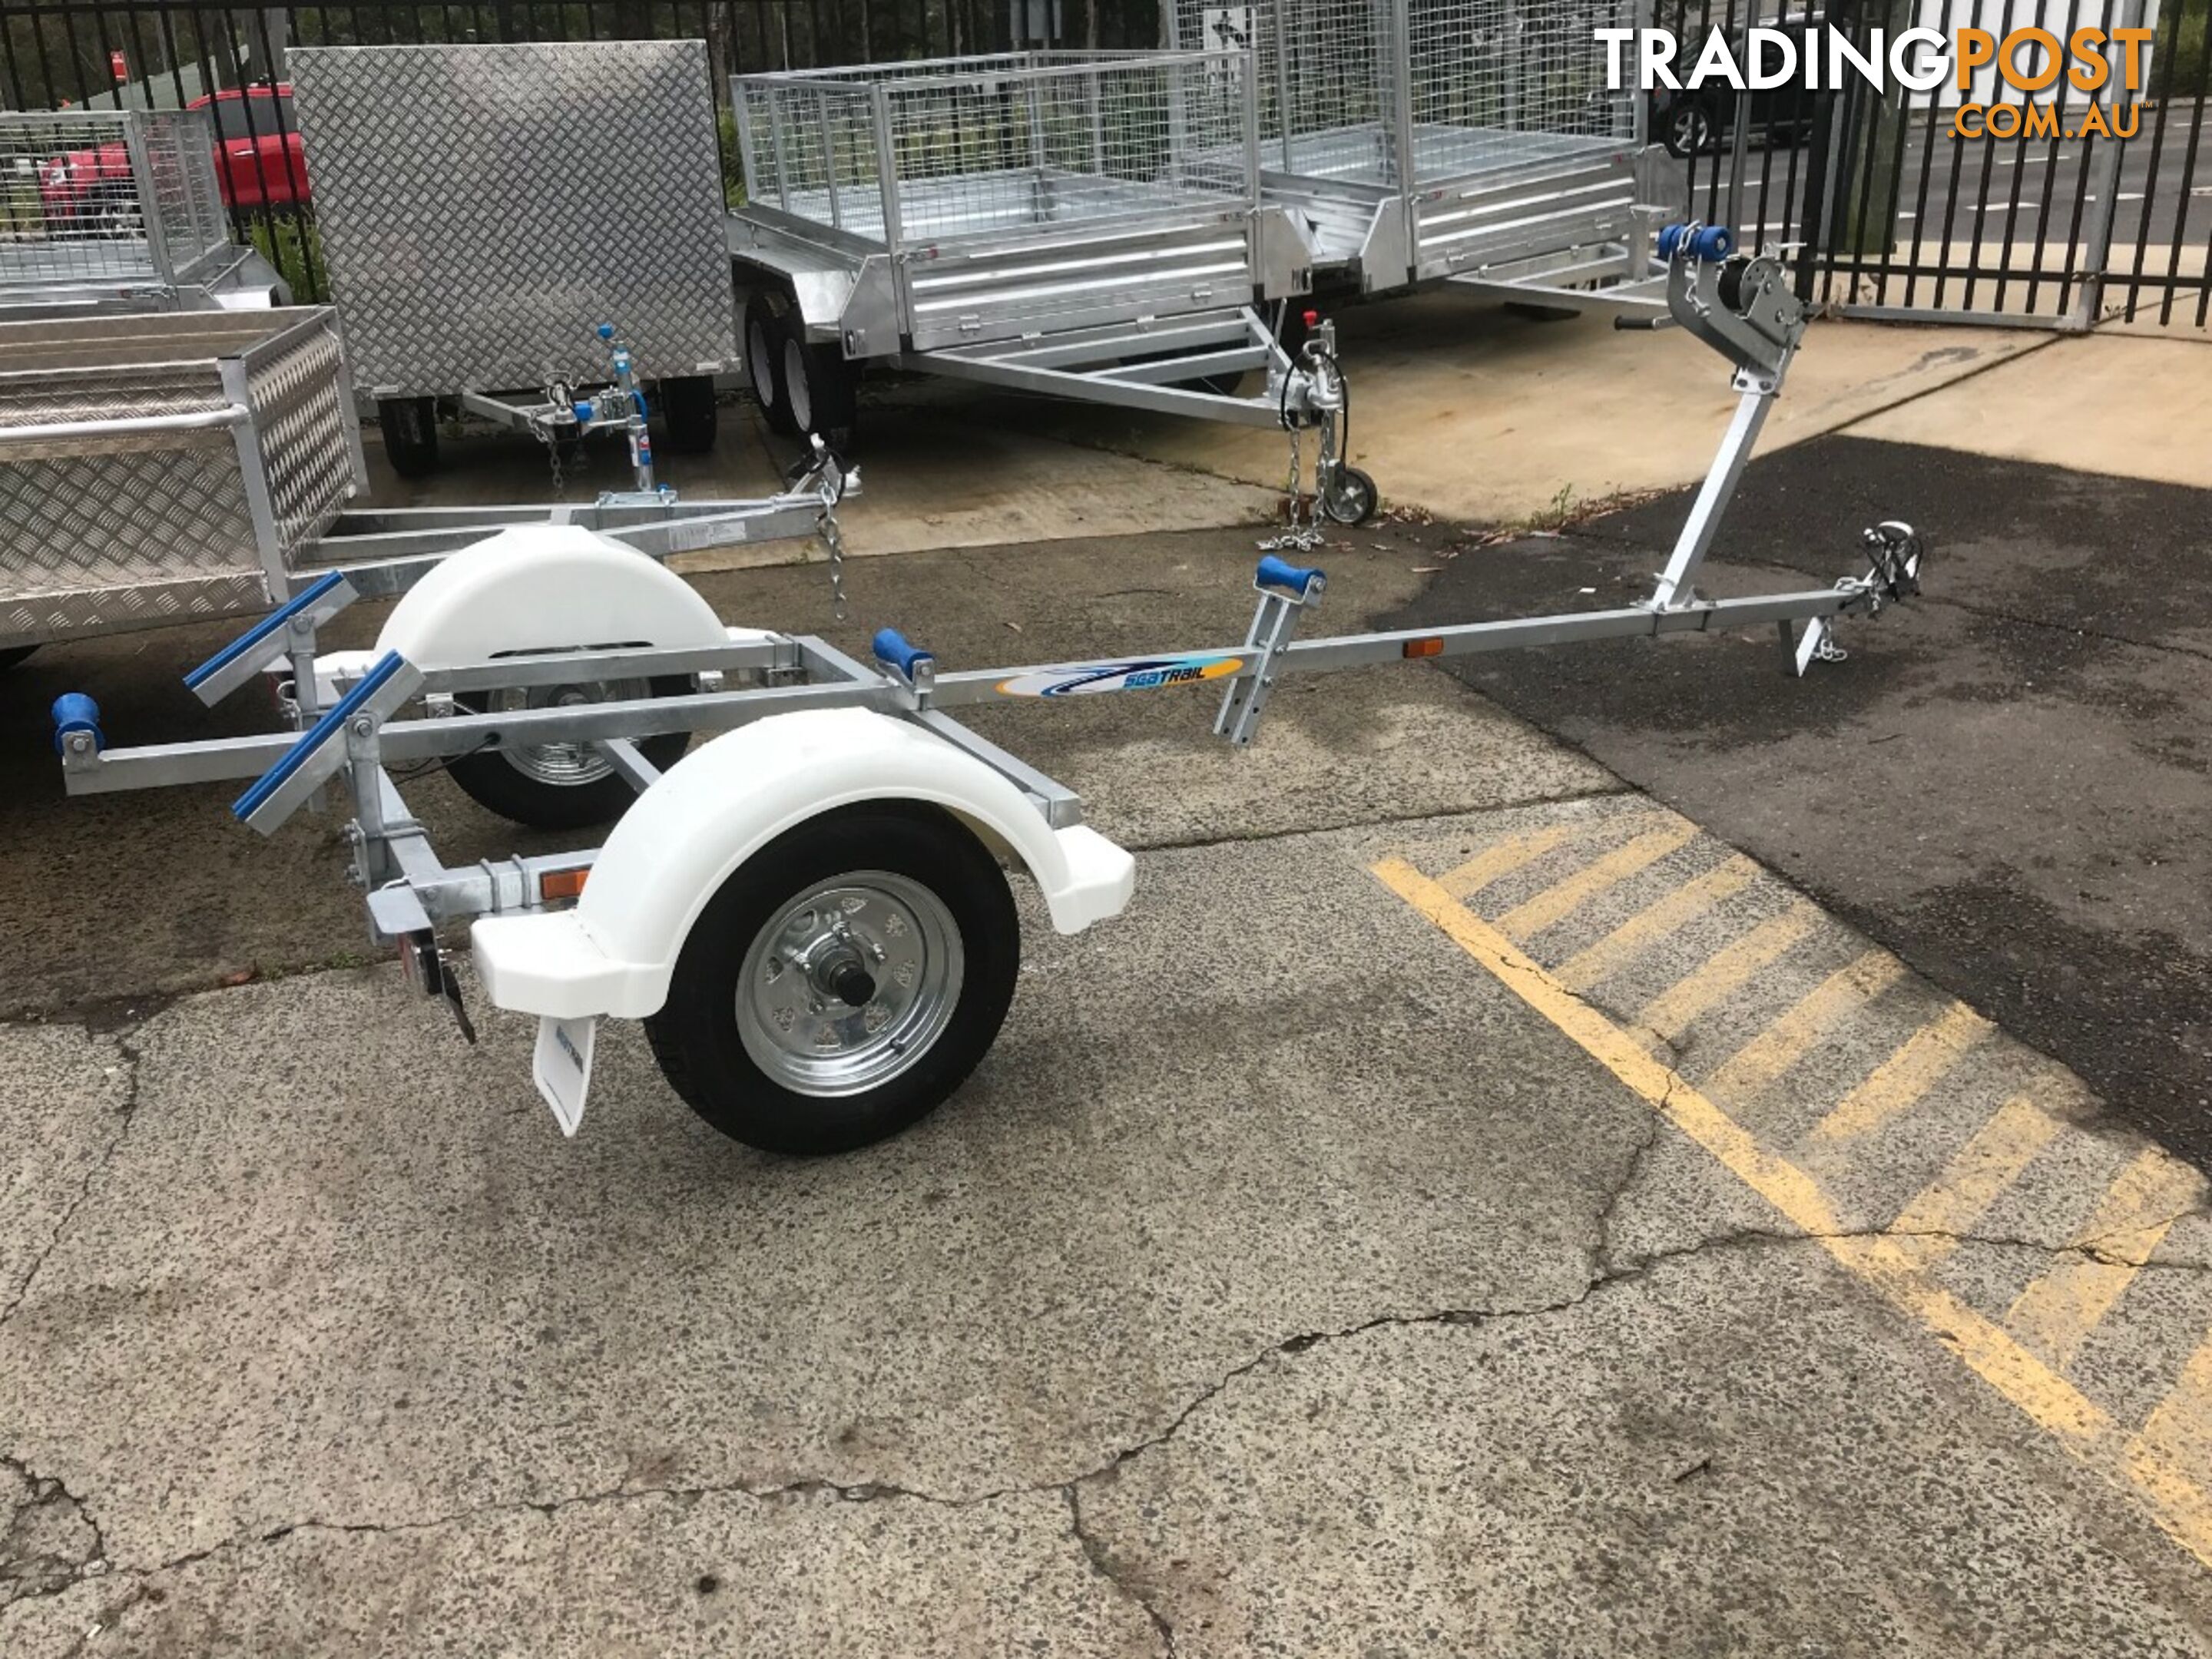 GAL BOAT TRAILER SUITS UP TO 4.0 mt ALUMINIUM HULL TARE 110 kg ATM 500 kg 